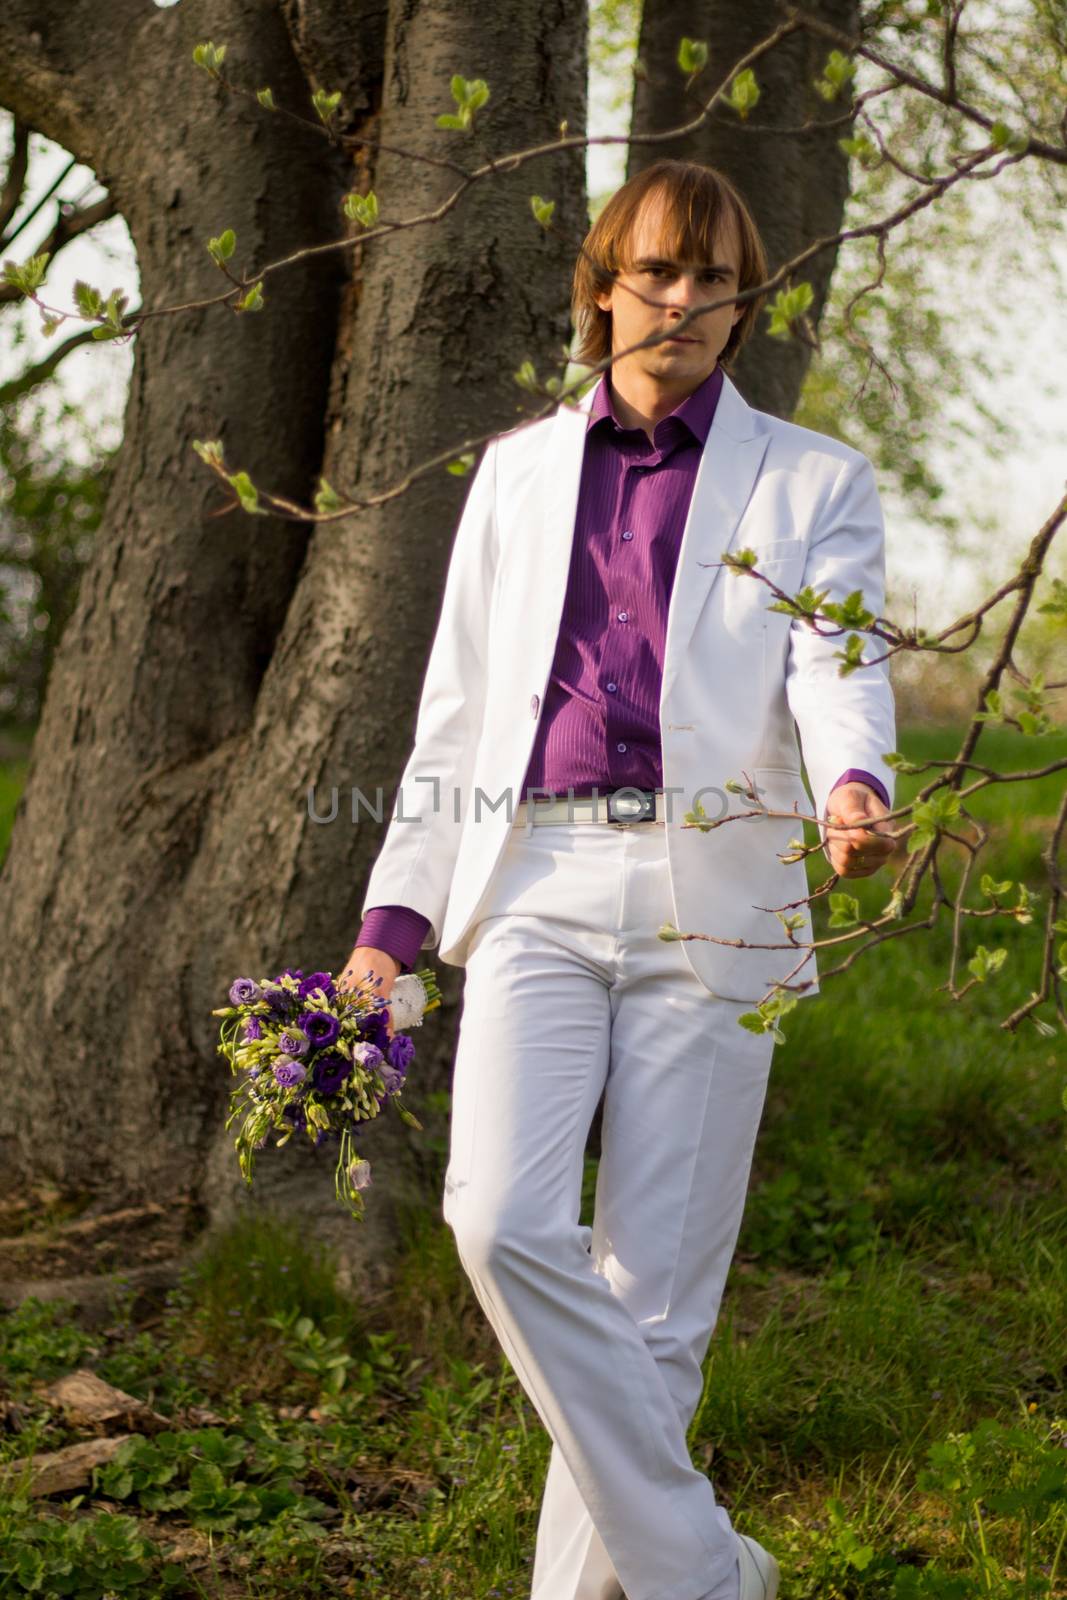 Handsome man wearing bouquet of flowers. For your commercial and editorial use.